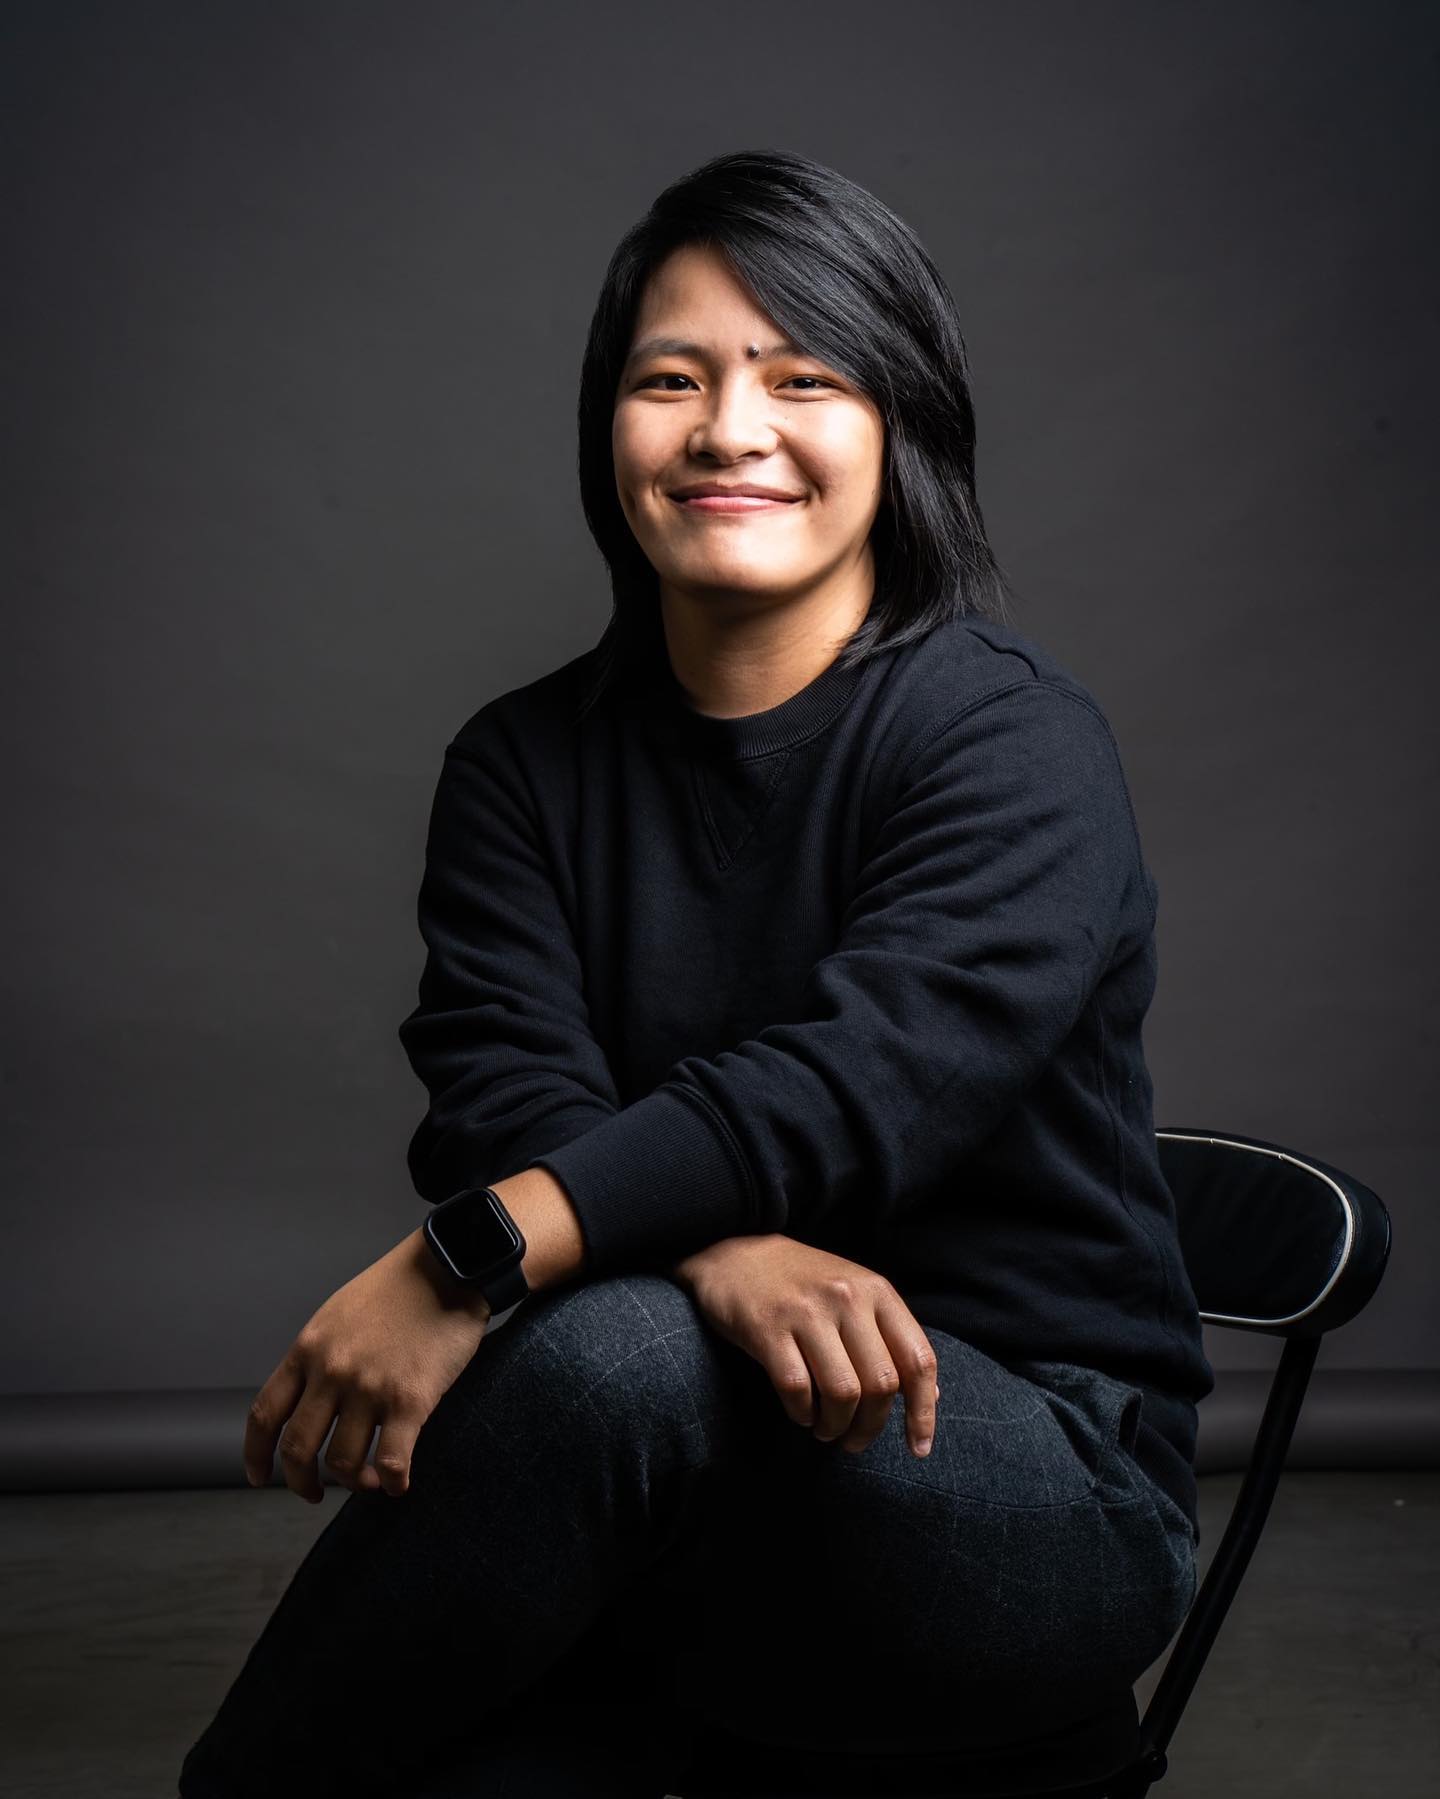 this inspiring filipina video director aims to empower fellow filipina creatives with her work